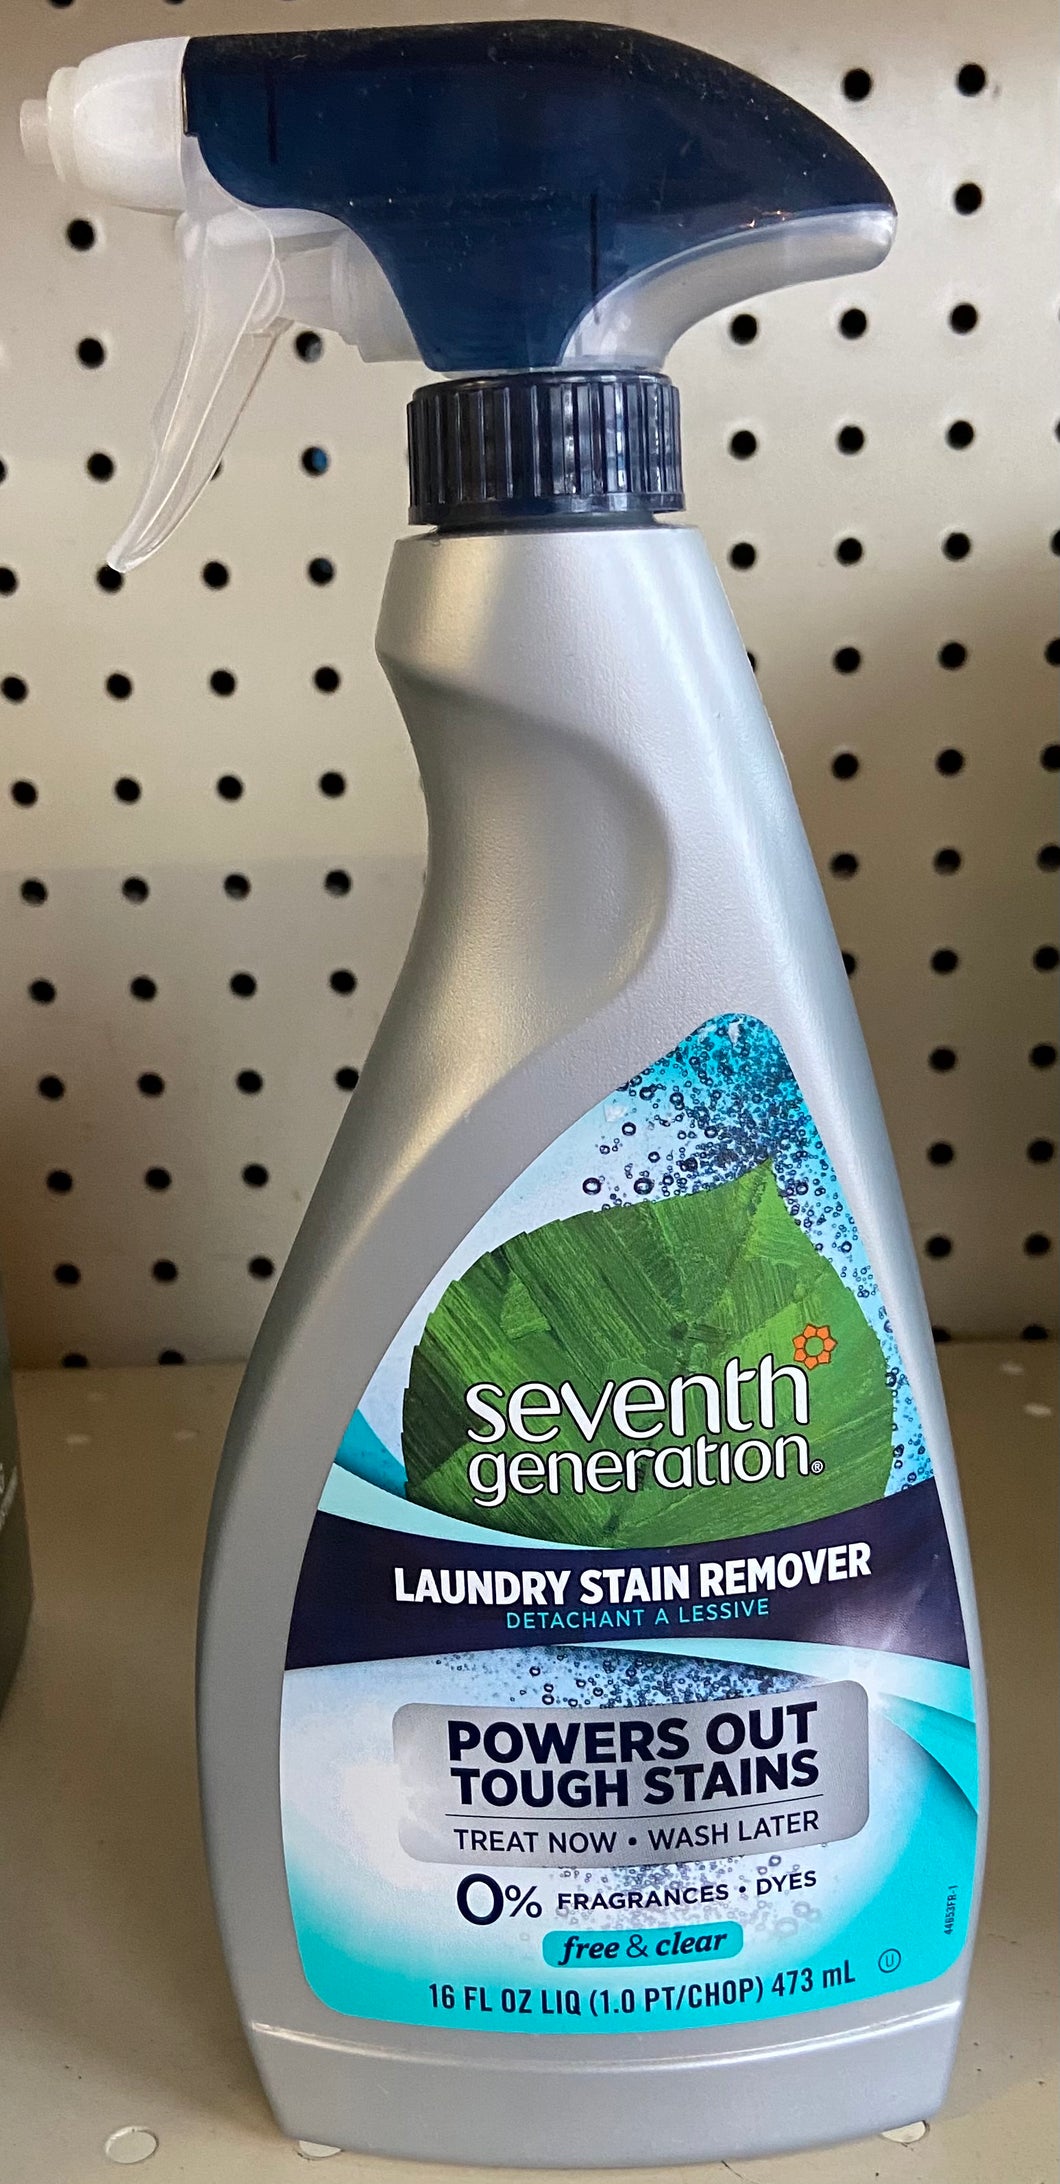 Laundry Stain Remover, Free and Clear, Seventh Generation